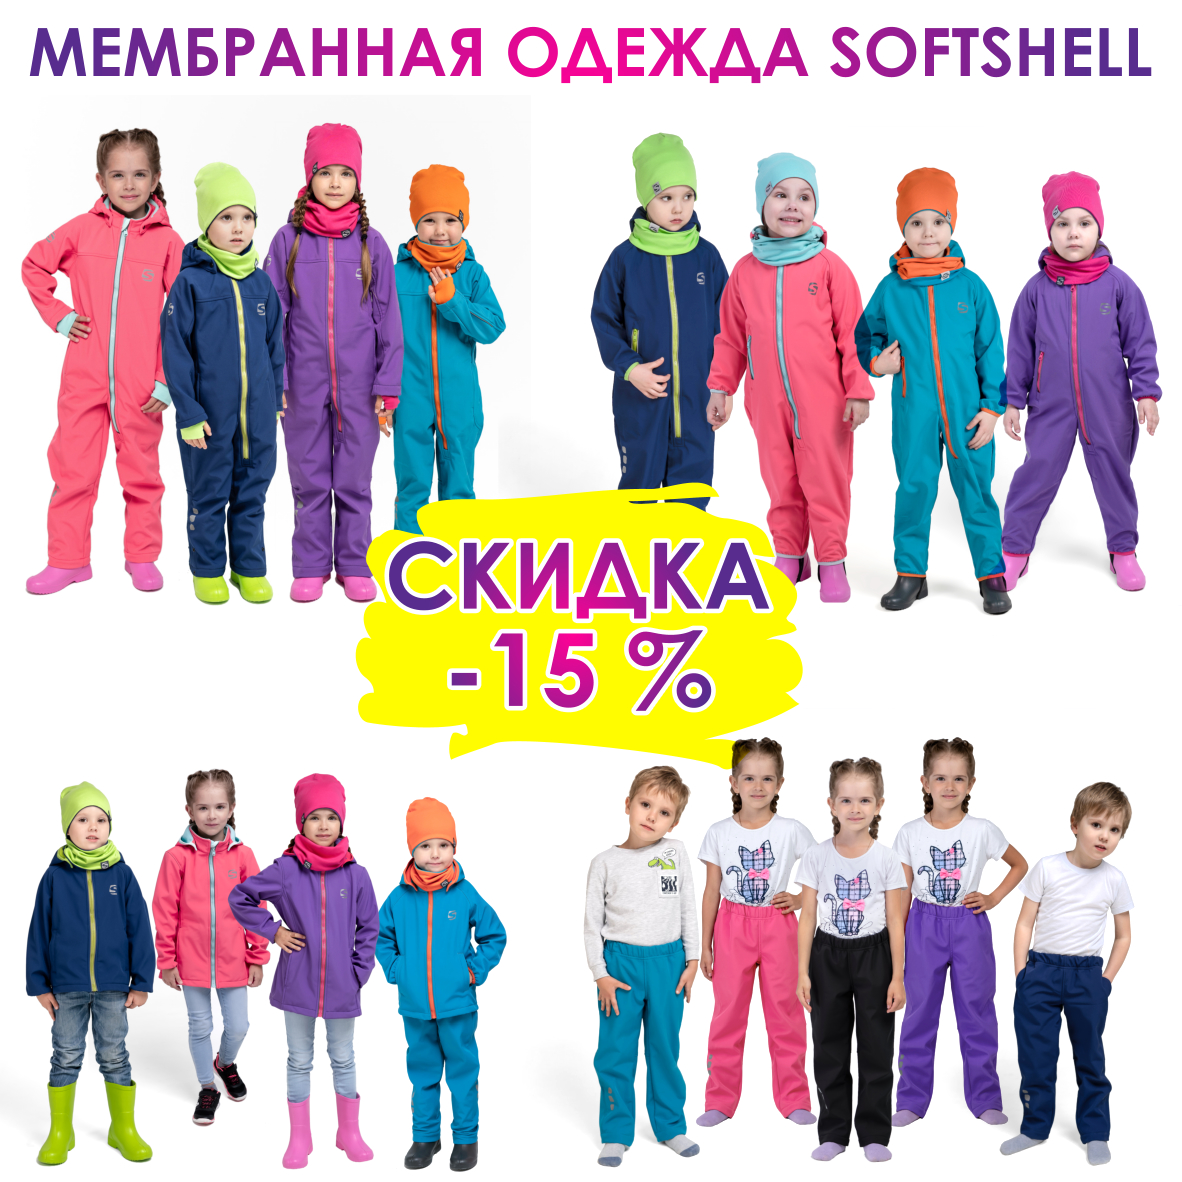   18.09. Smail-35.   !     !   !   Softshell,   ! , , , , !  !